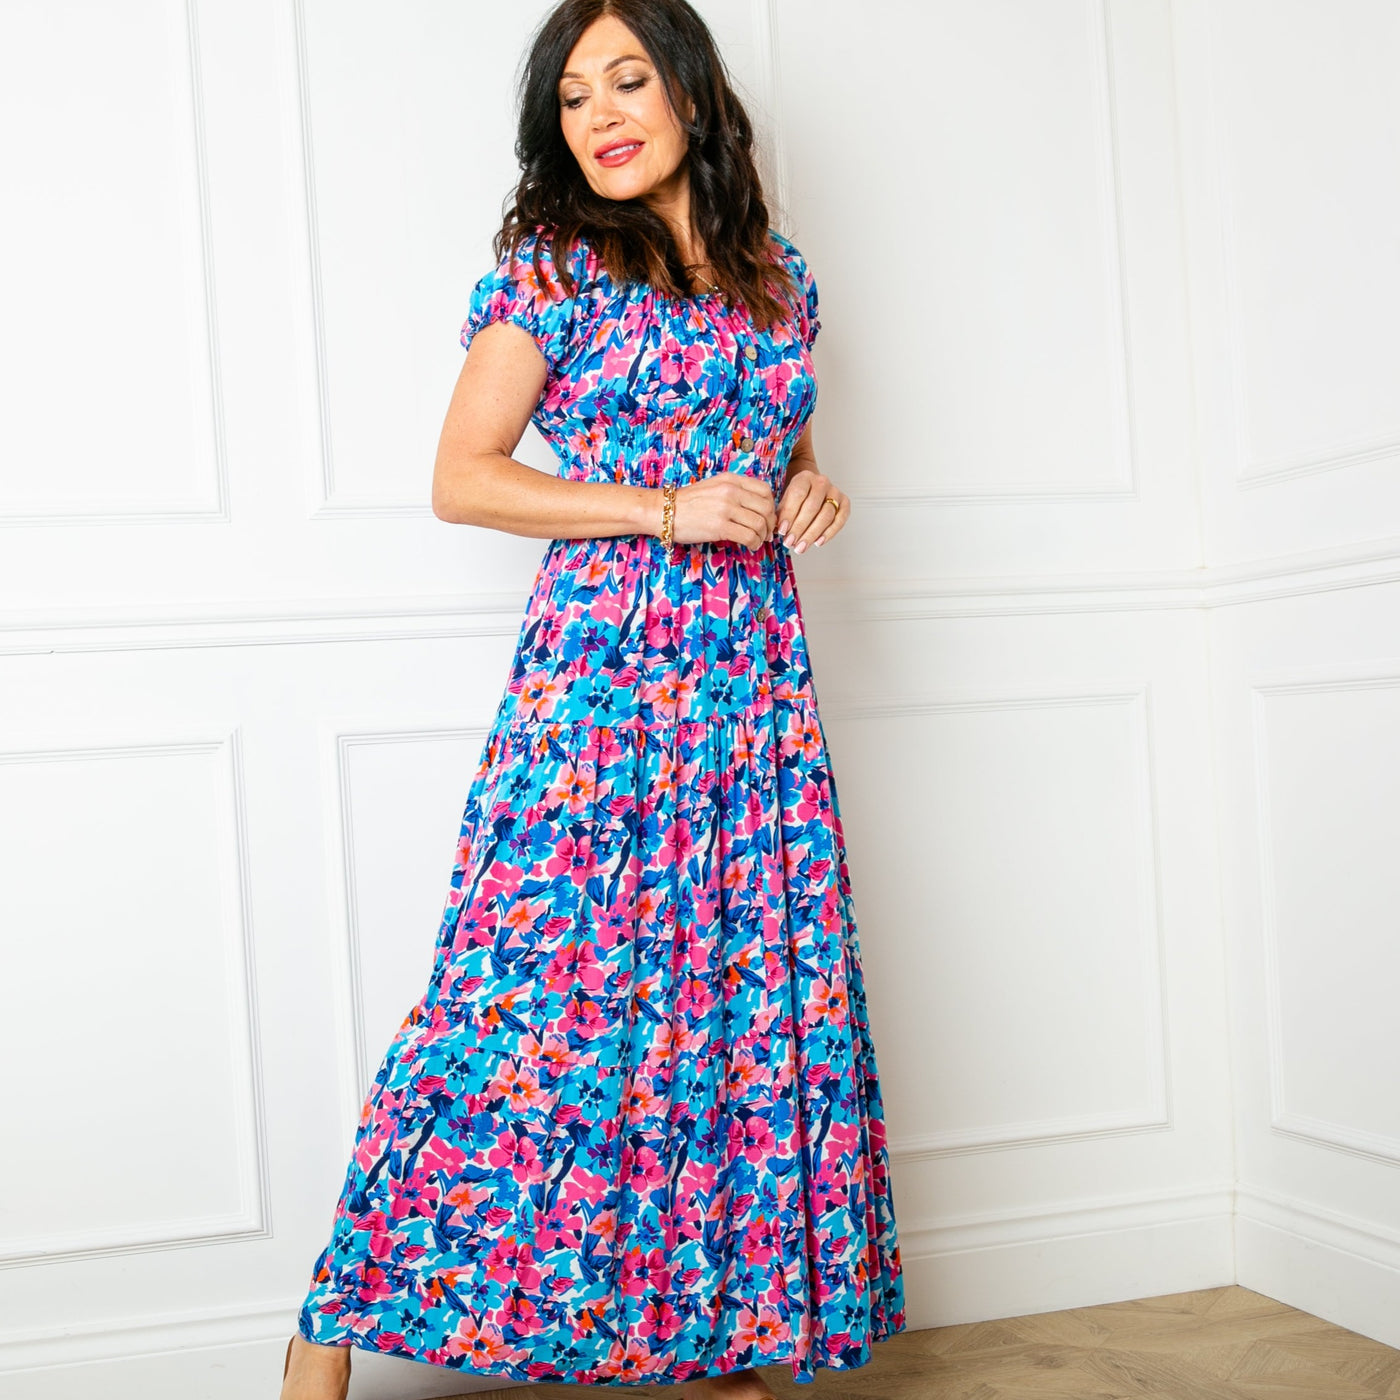 The floral blue Printed Button Maxi Dress with a maxi tiered skirt in a fun summery pattern